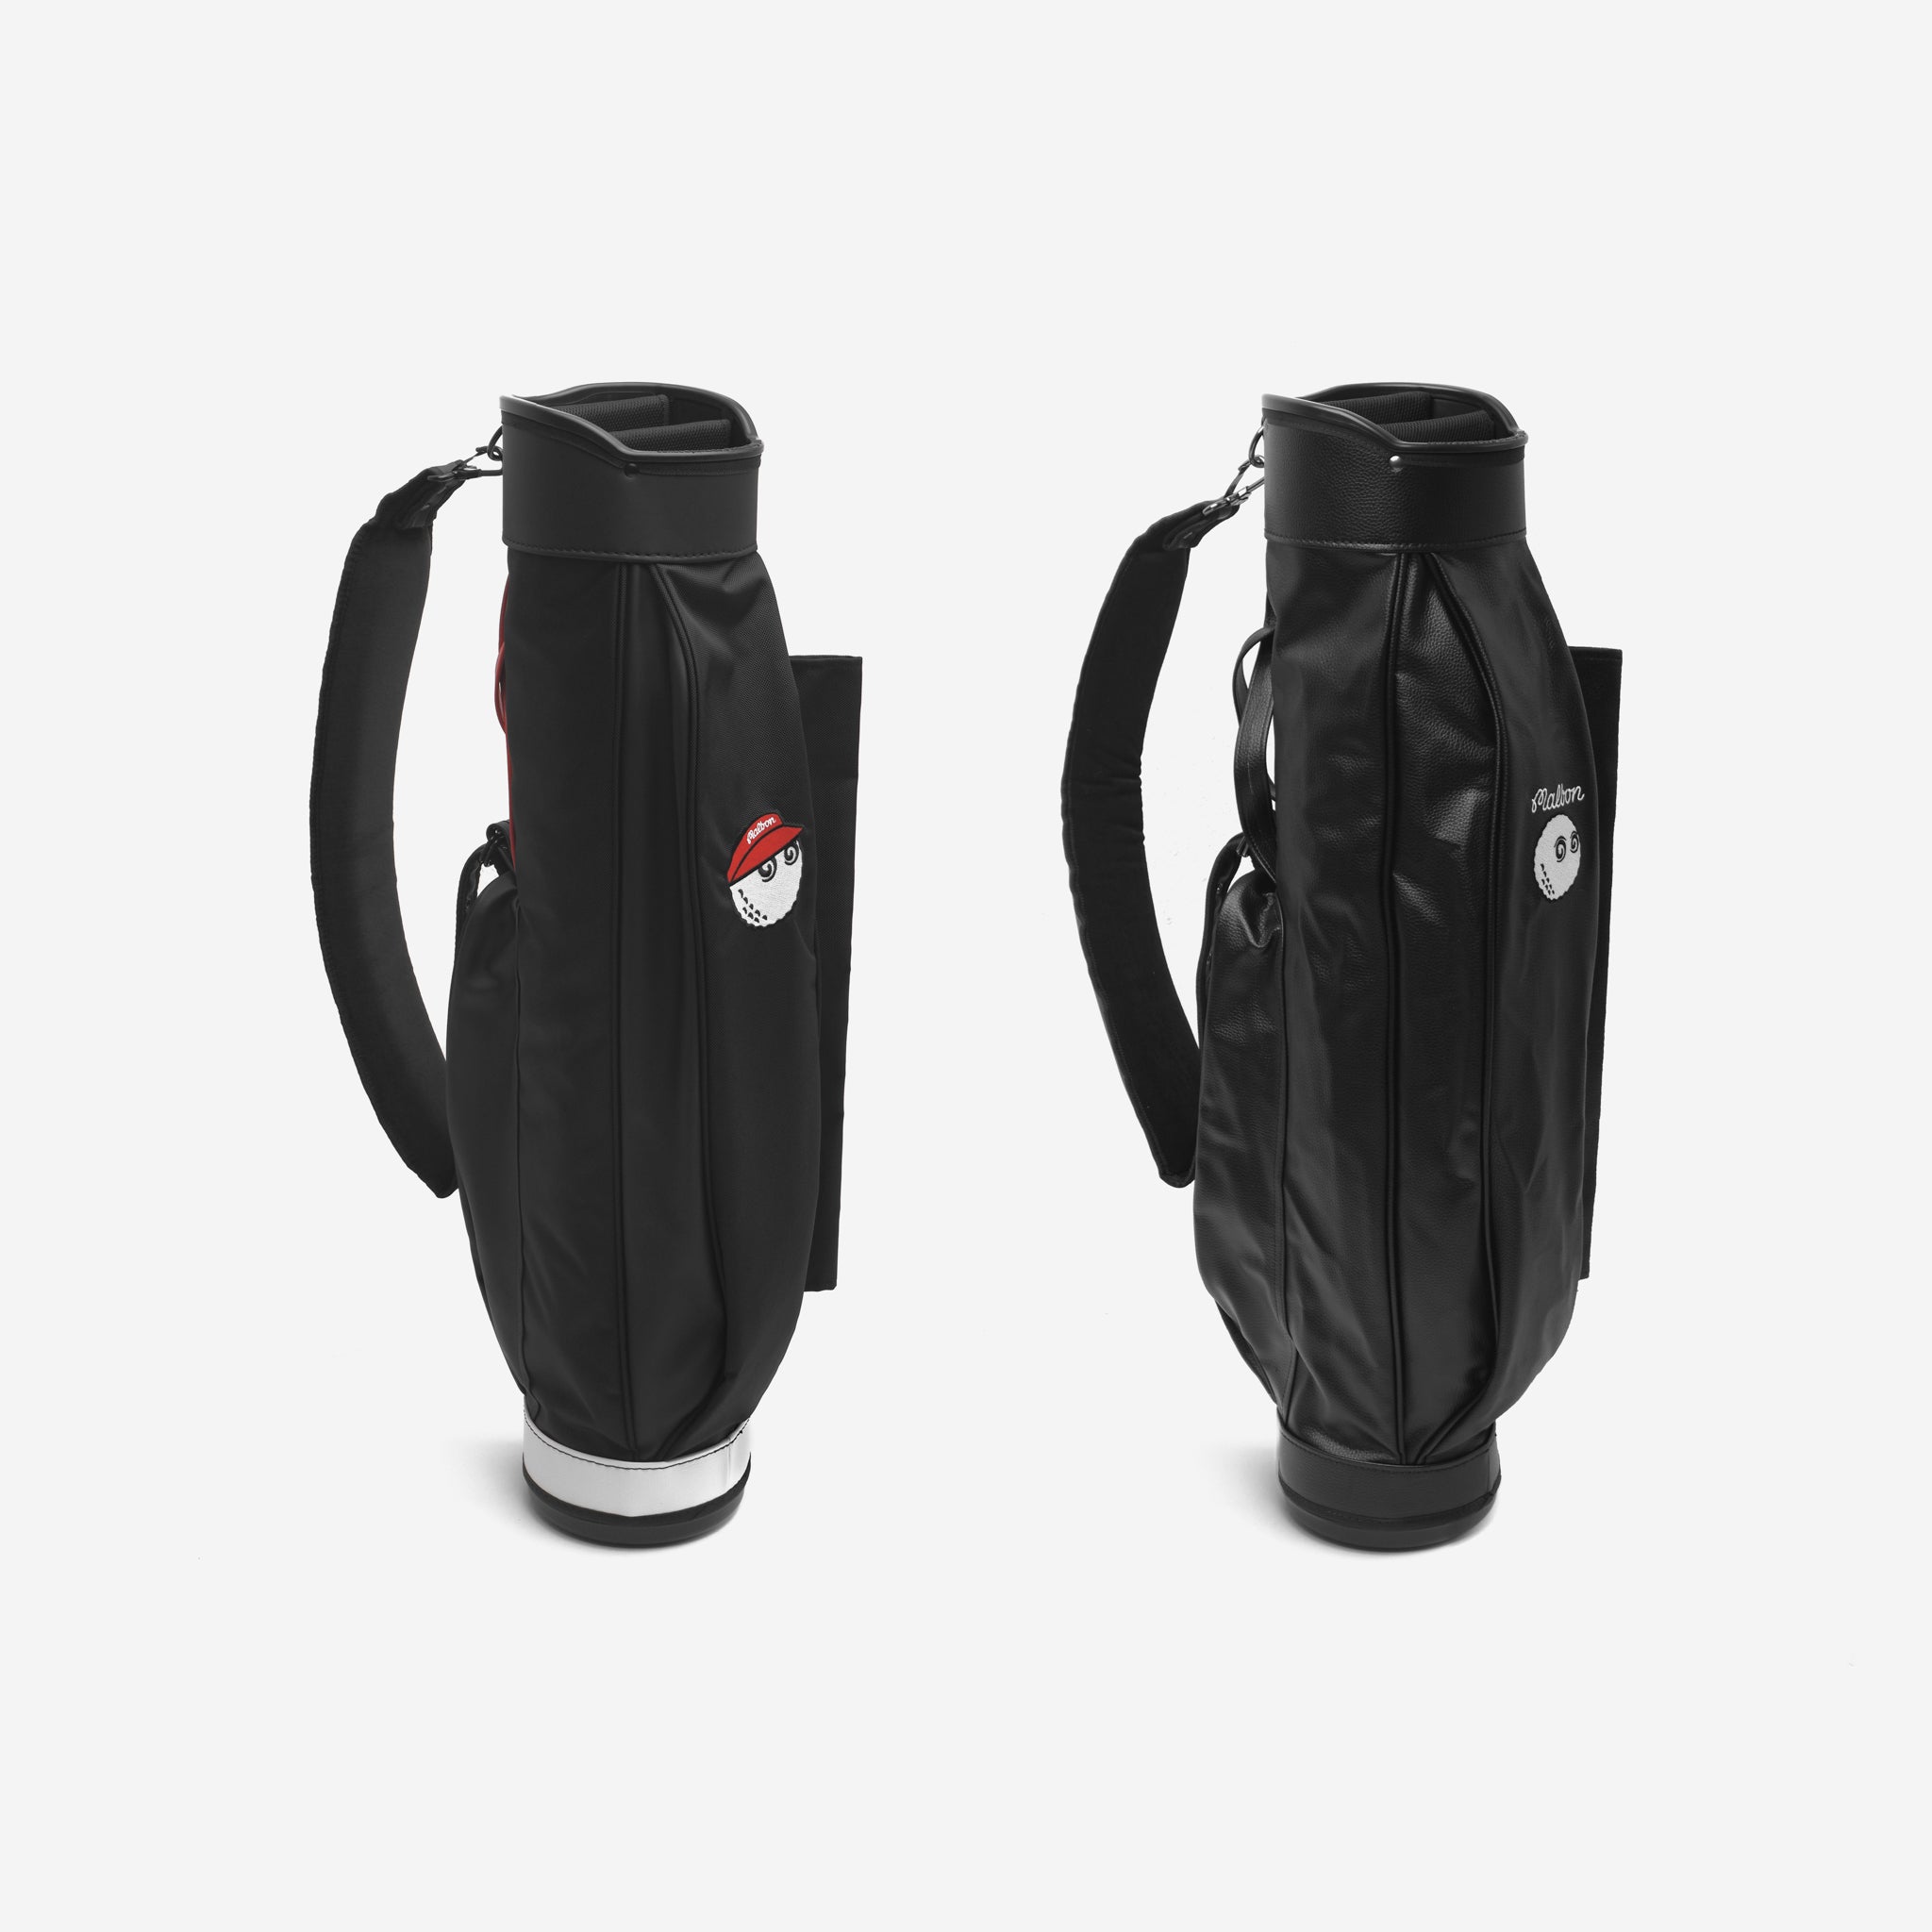 UNDEFEATED x Malbon The UNDEFEATED x Malbon Stand Golf Bag is available in  black and sand. It features multiple zippered pockets, a…